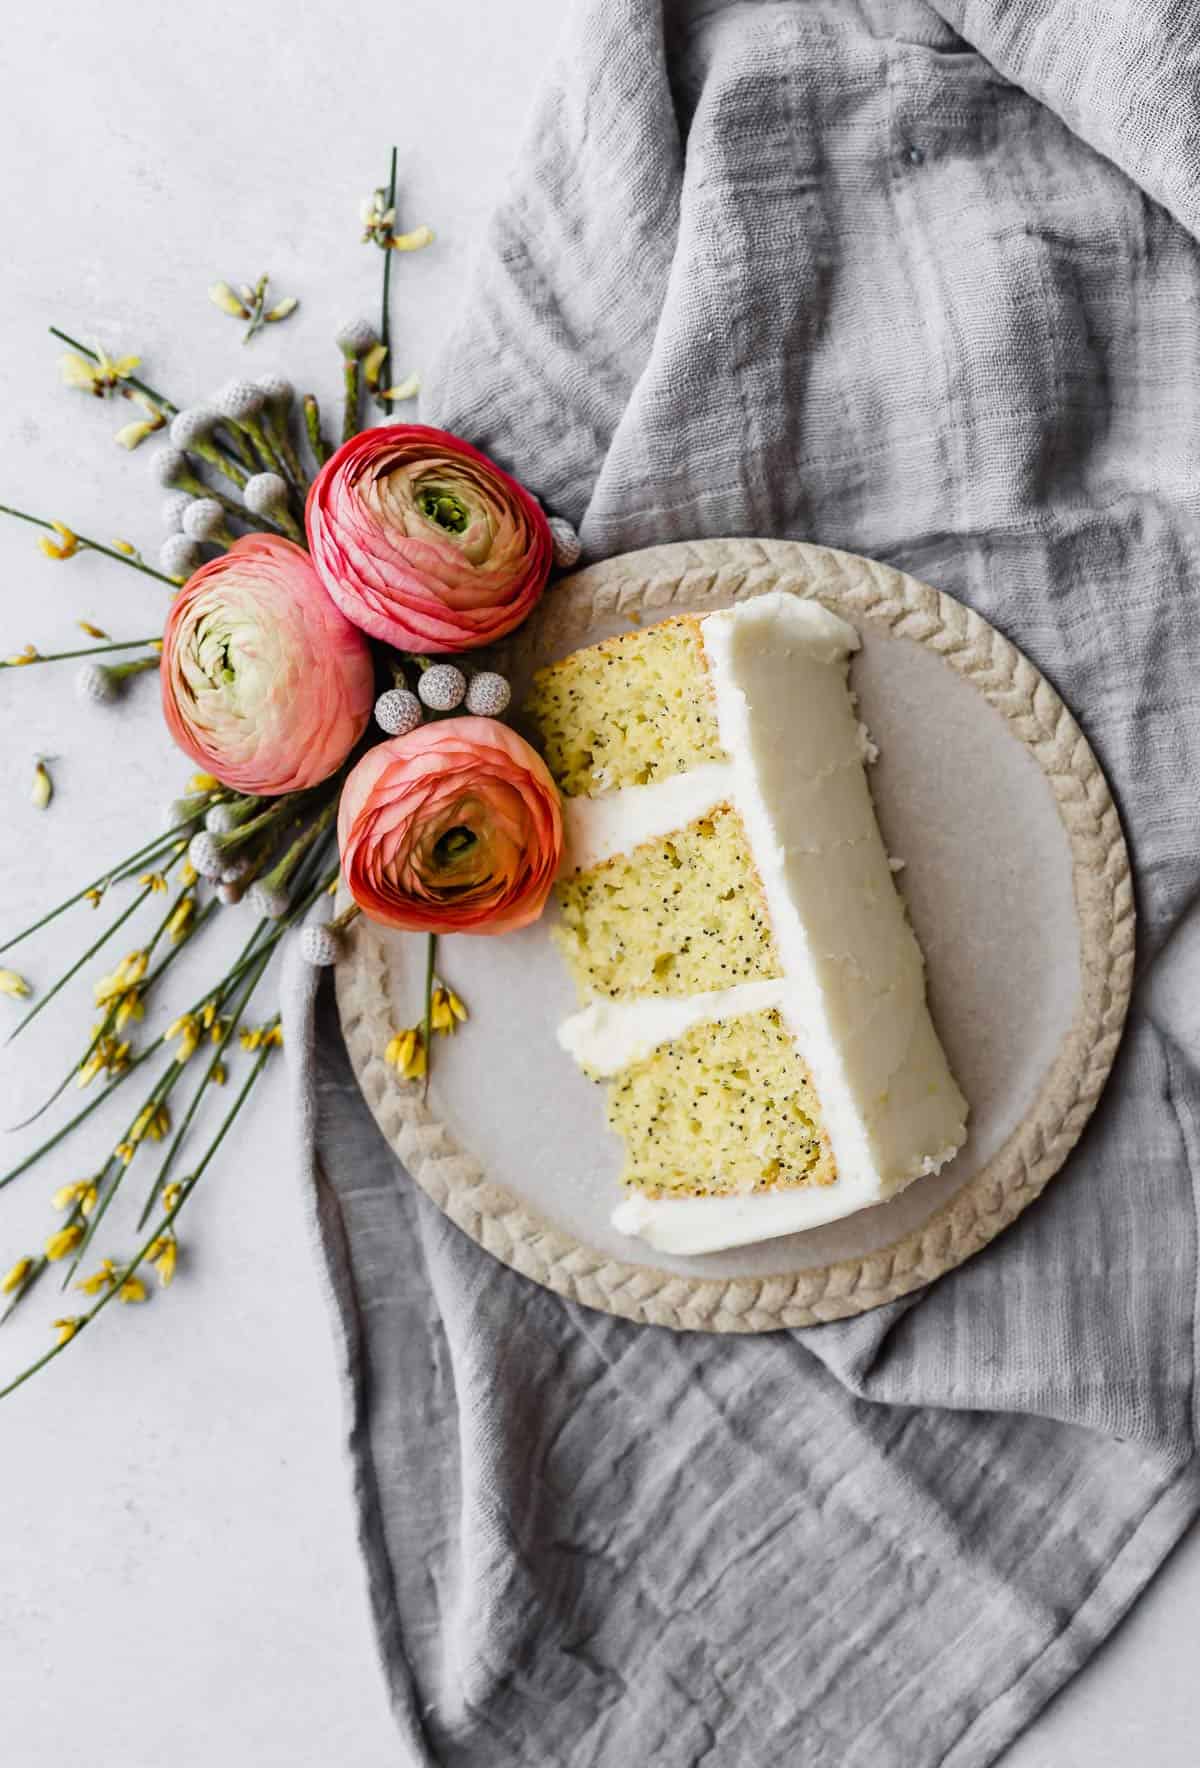 A slice of Lemon Poppy Seed Cake made with Cake Mix on a plate with three pink flowers near the cake.